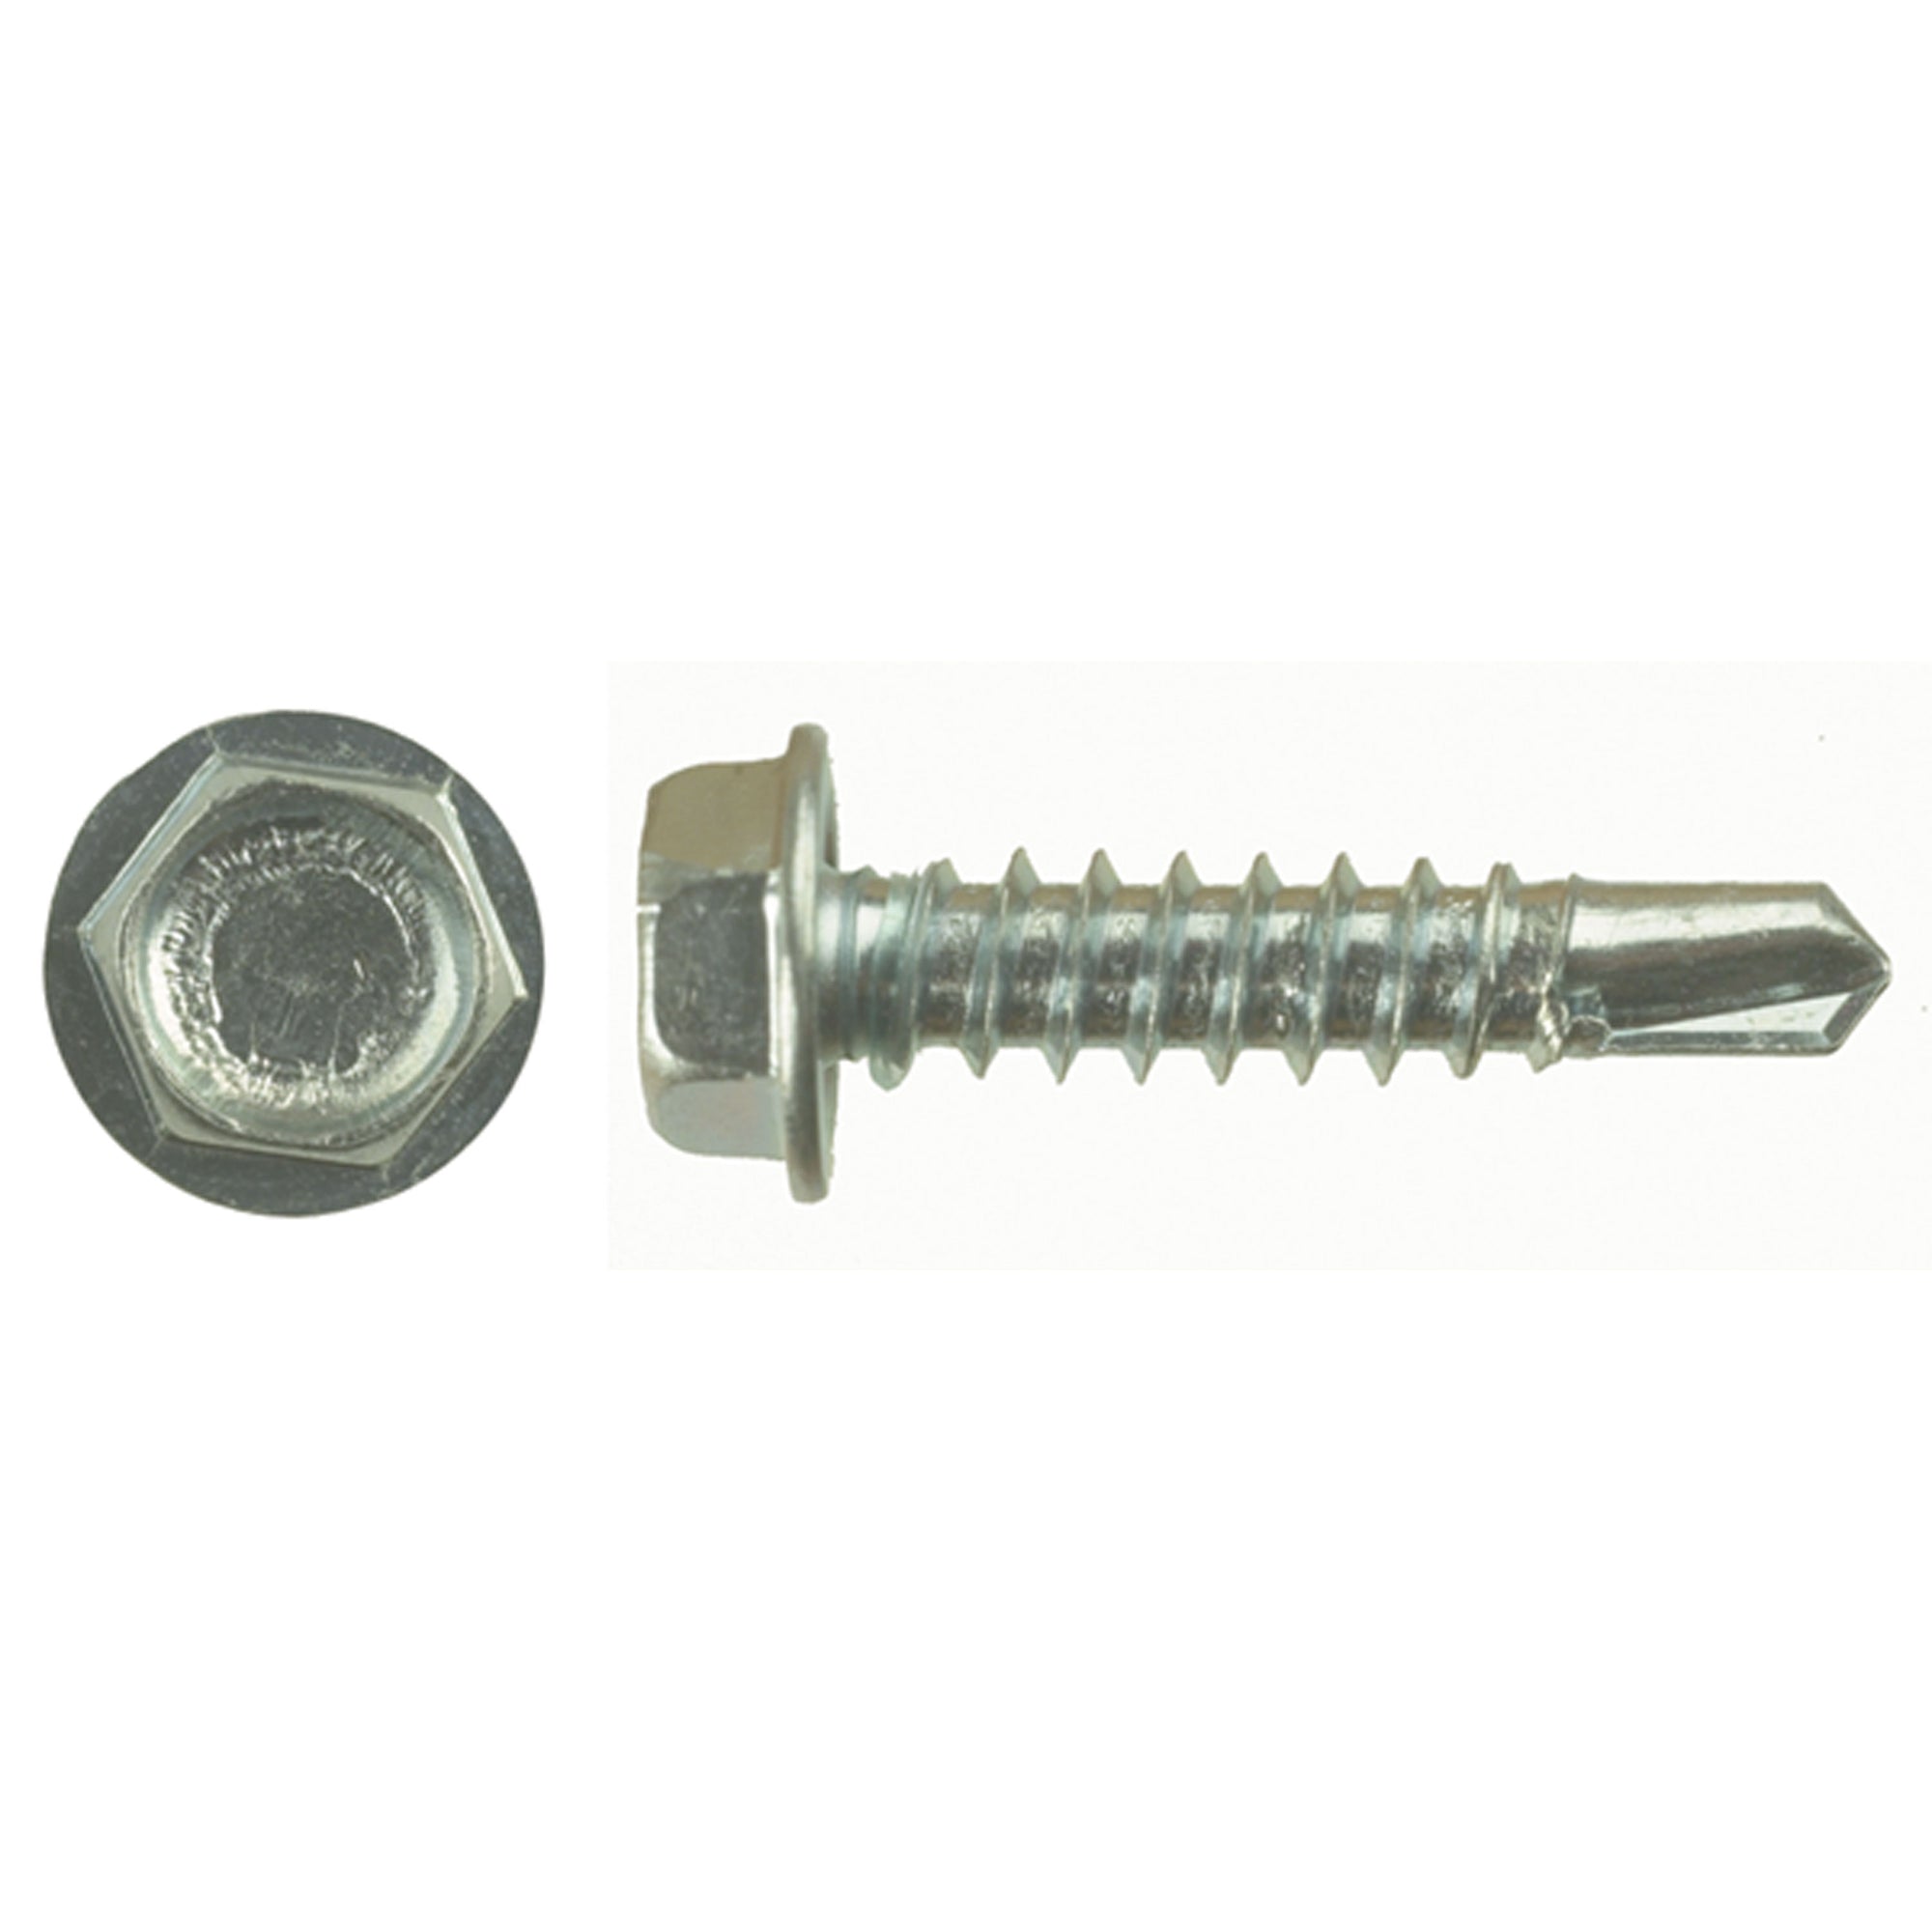 AP Products 012-DP500 8 X 1/2 Self-Tapping 1/4" Hex Head Screw, Pack of 500 - 1/2"